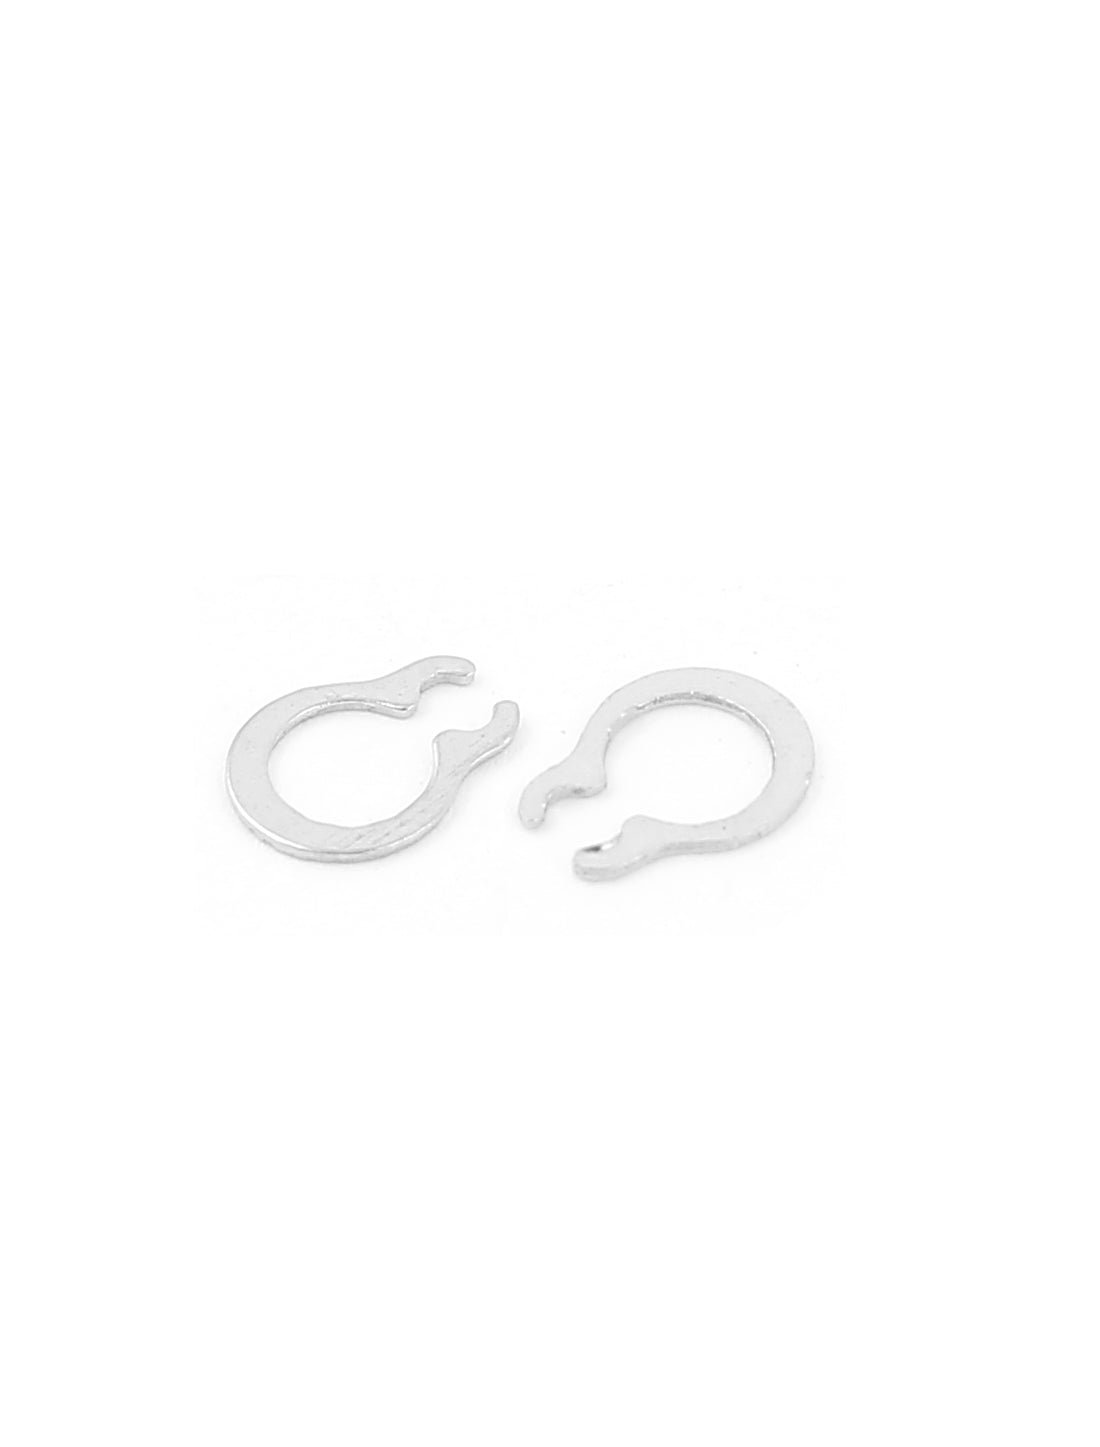 uxcell Uxcell 10pcs Plane Retaining Ring C-Clip for 4mm Rimfire Motor Shafts